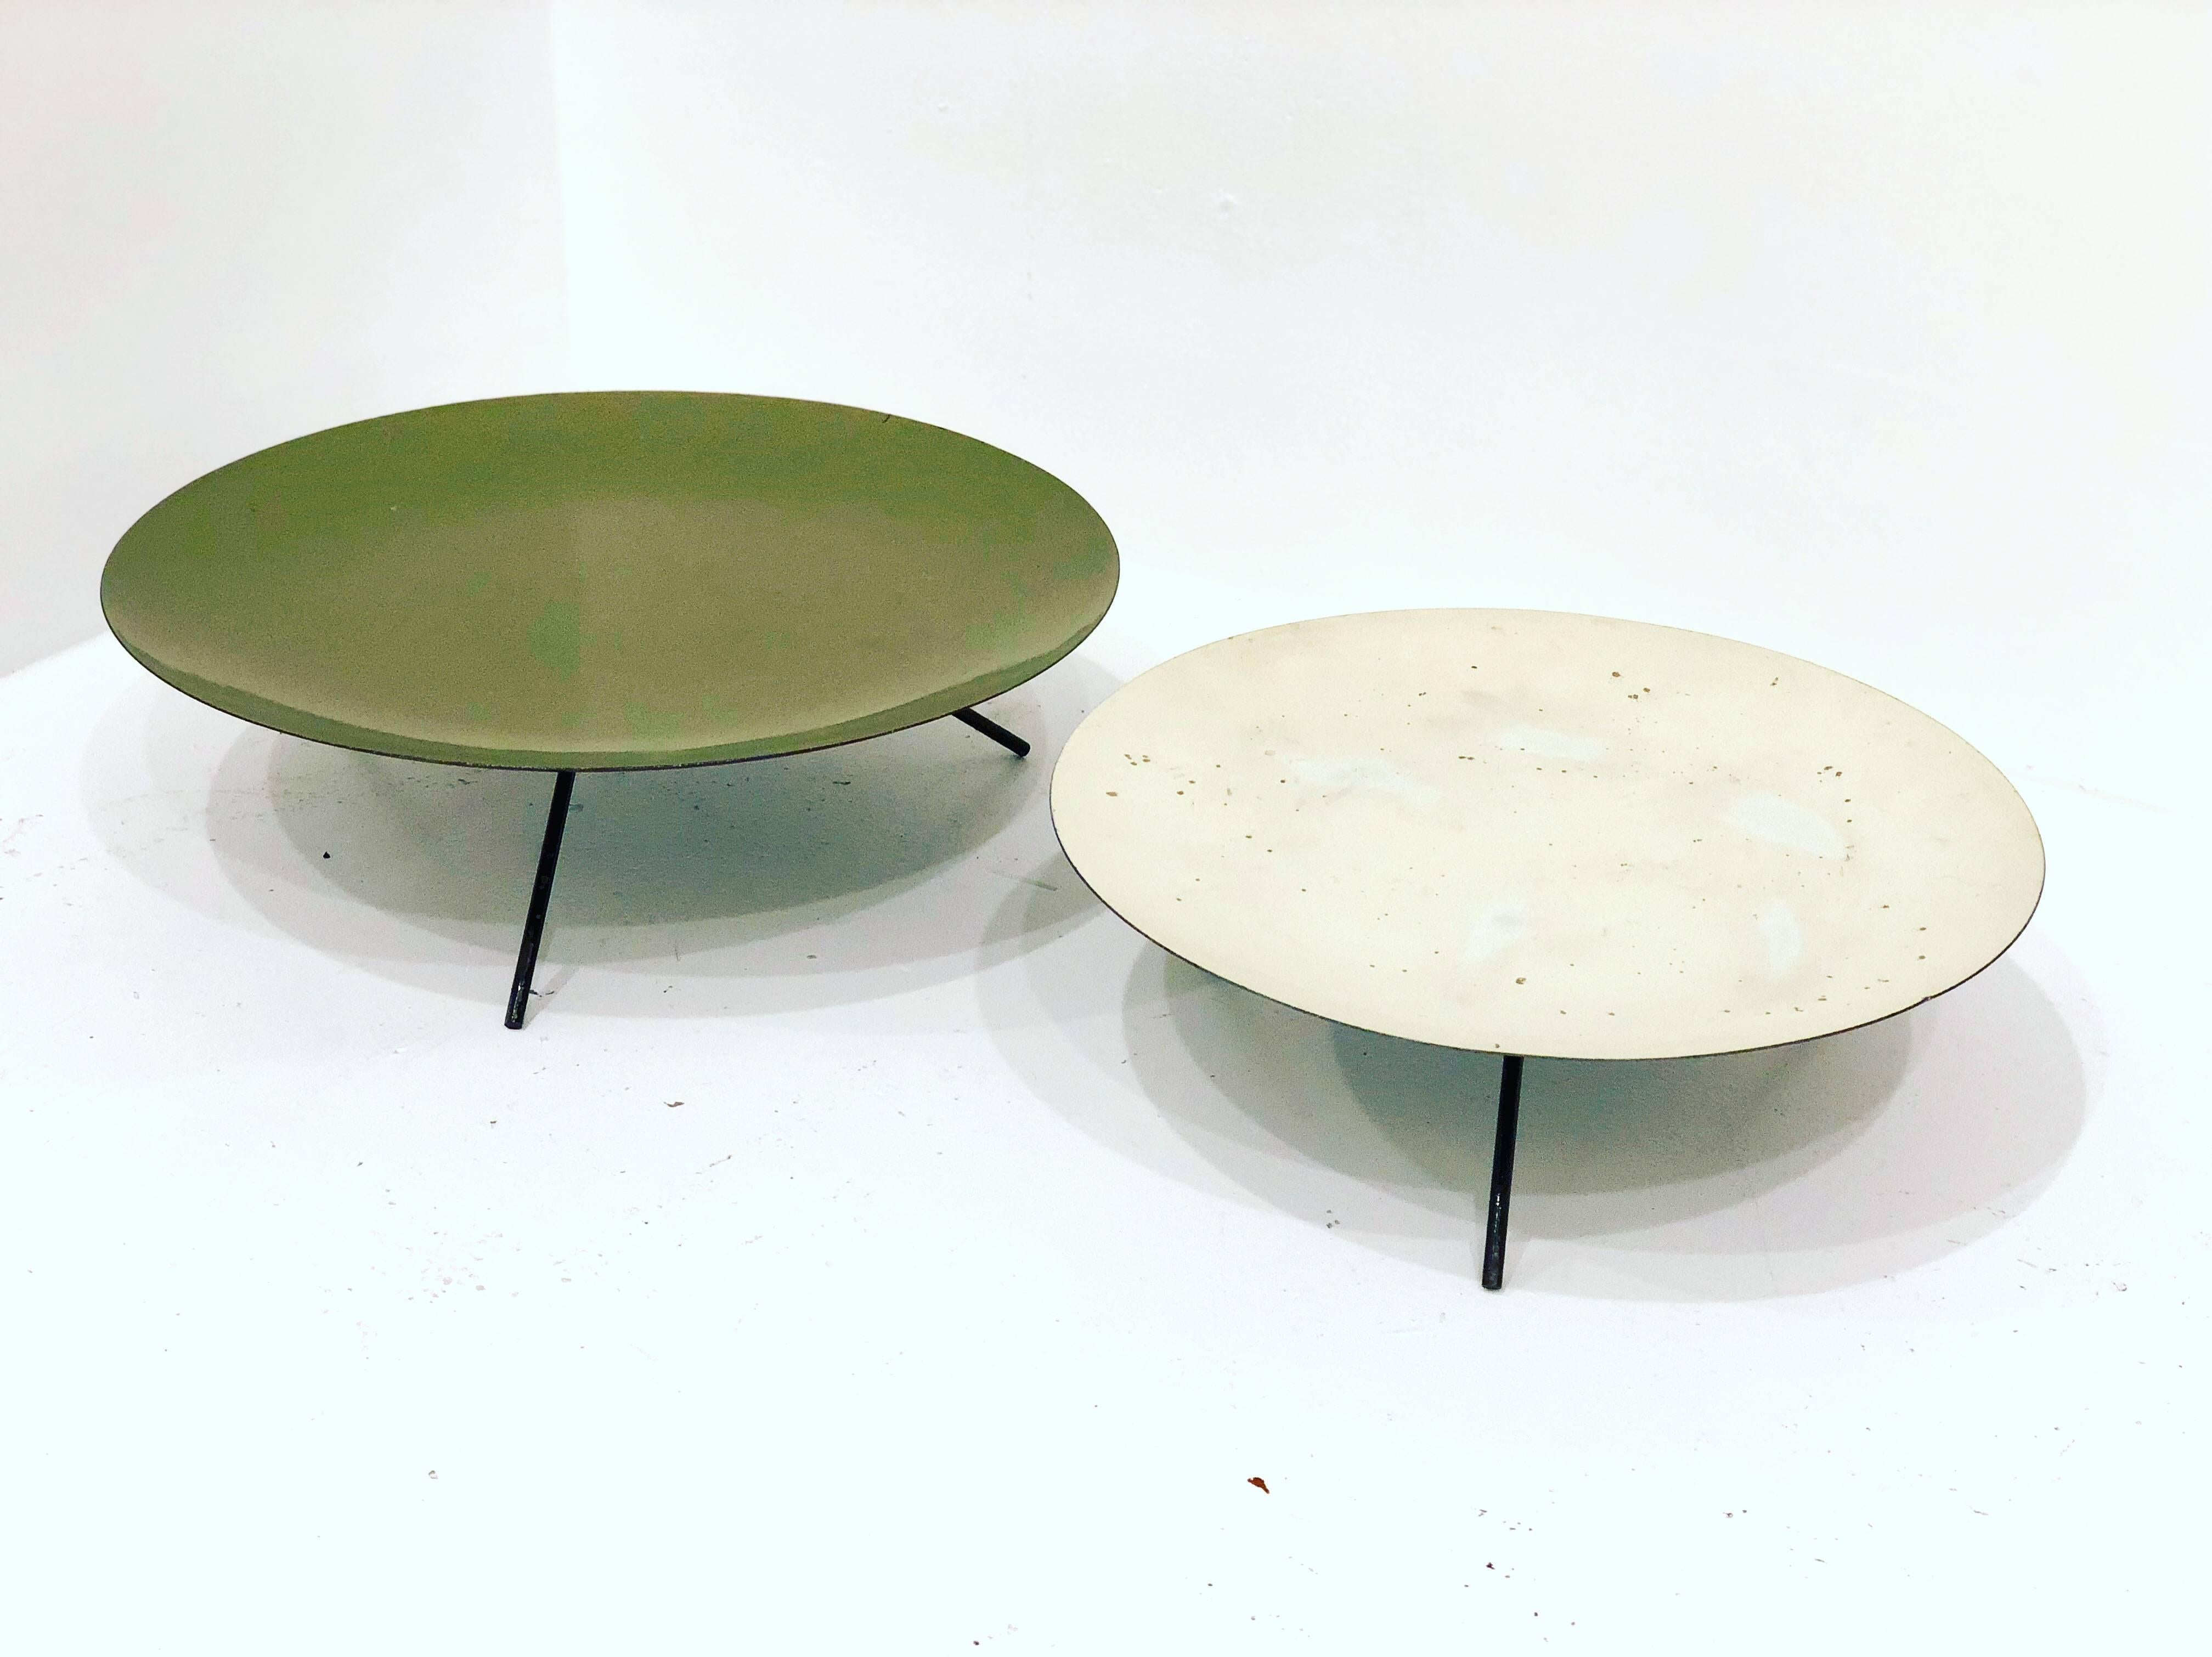 20th Century Pair of Atomic Age Enameled Metal Serving Trays by Trend of California Design